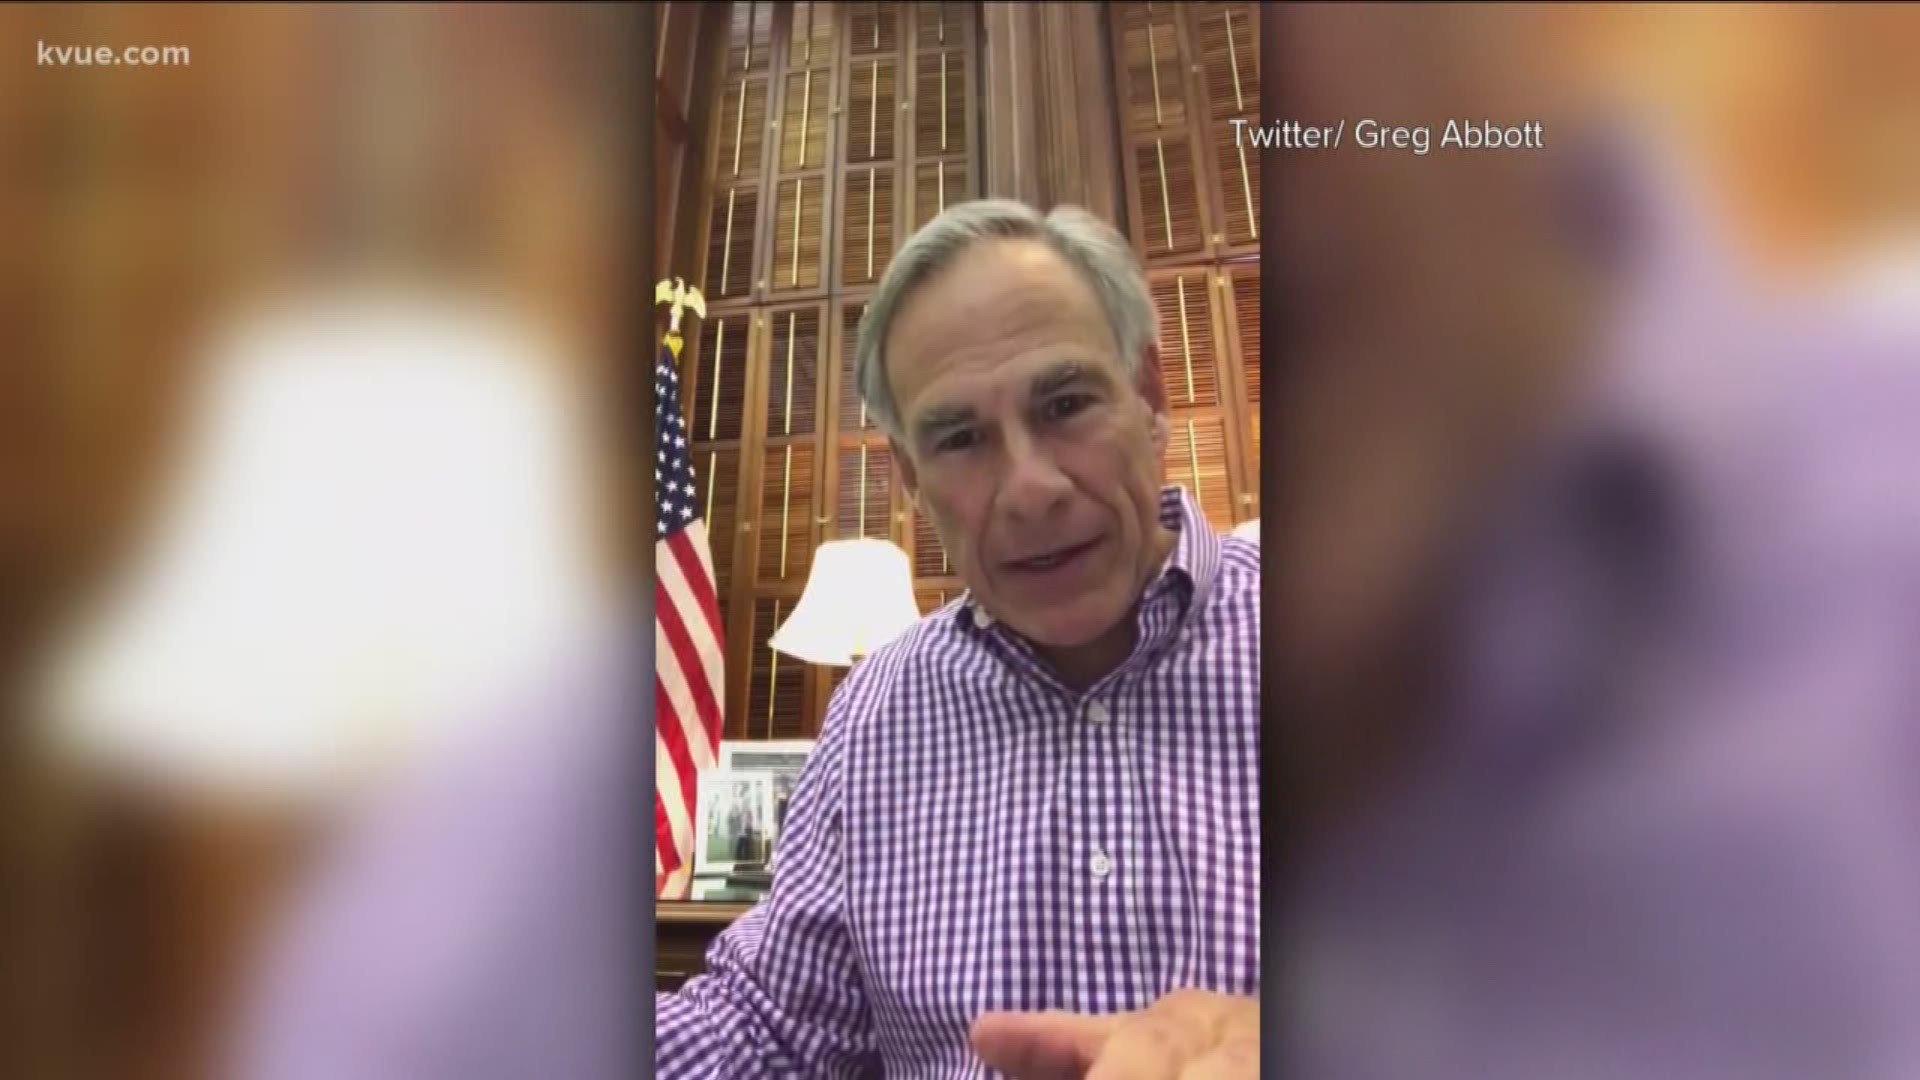 Gov. Abbott signed a bill on Sunday that supports free speech on college campuses in Texas.